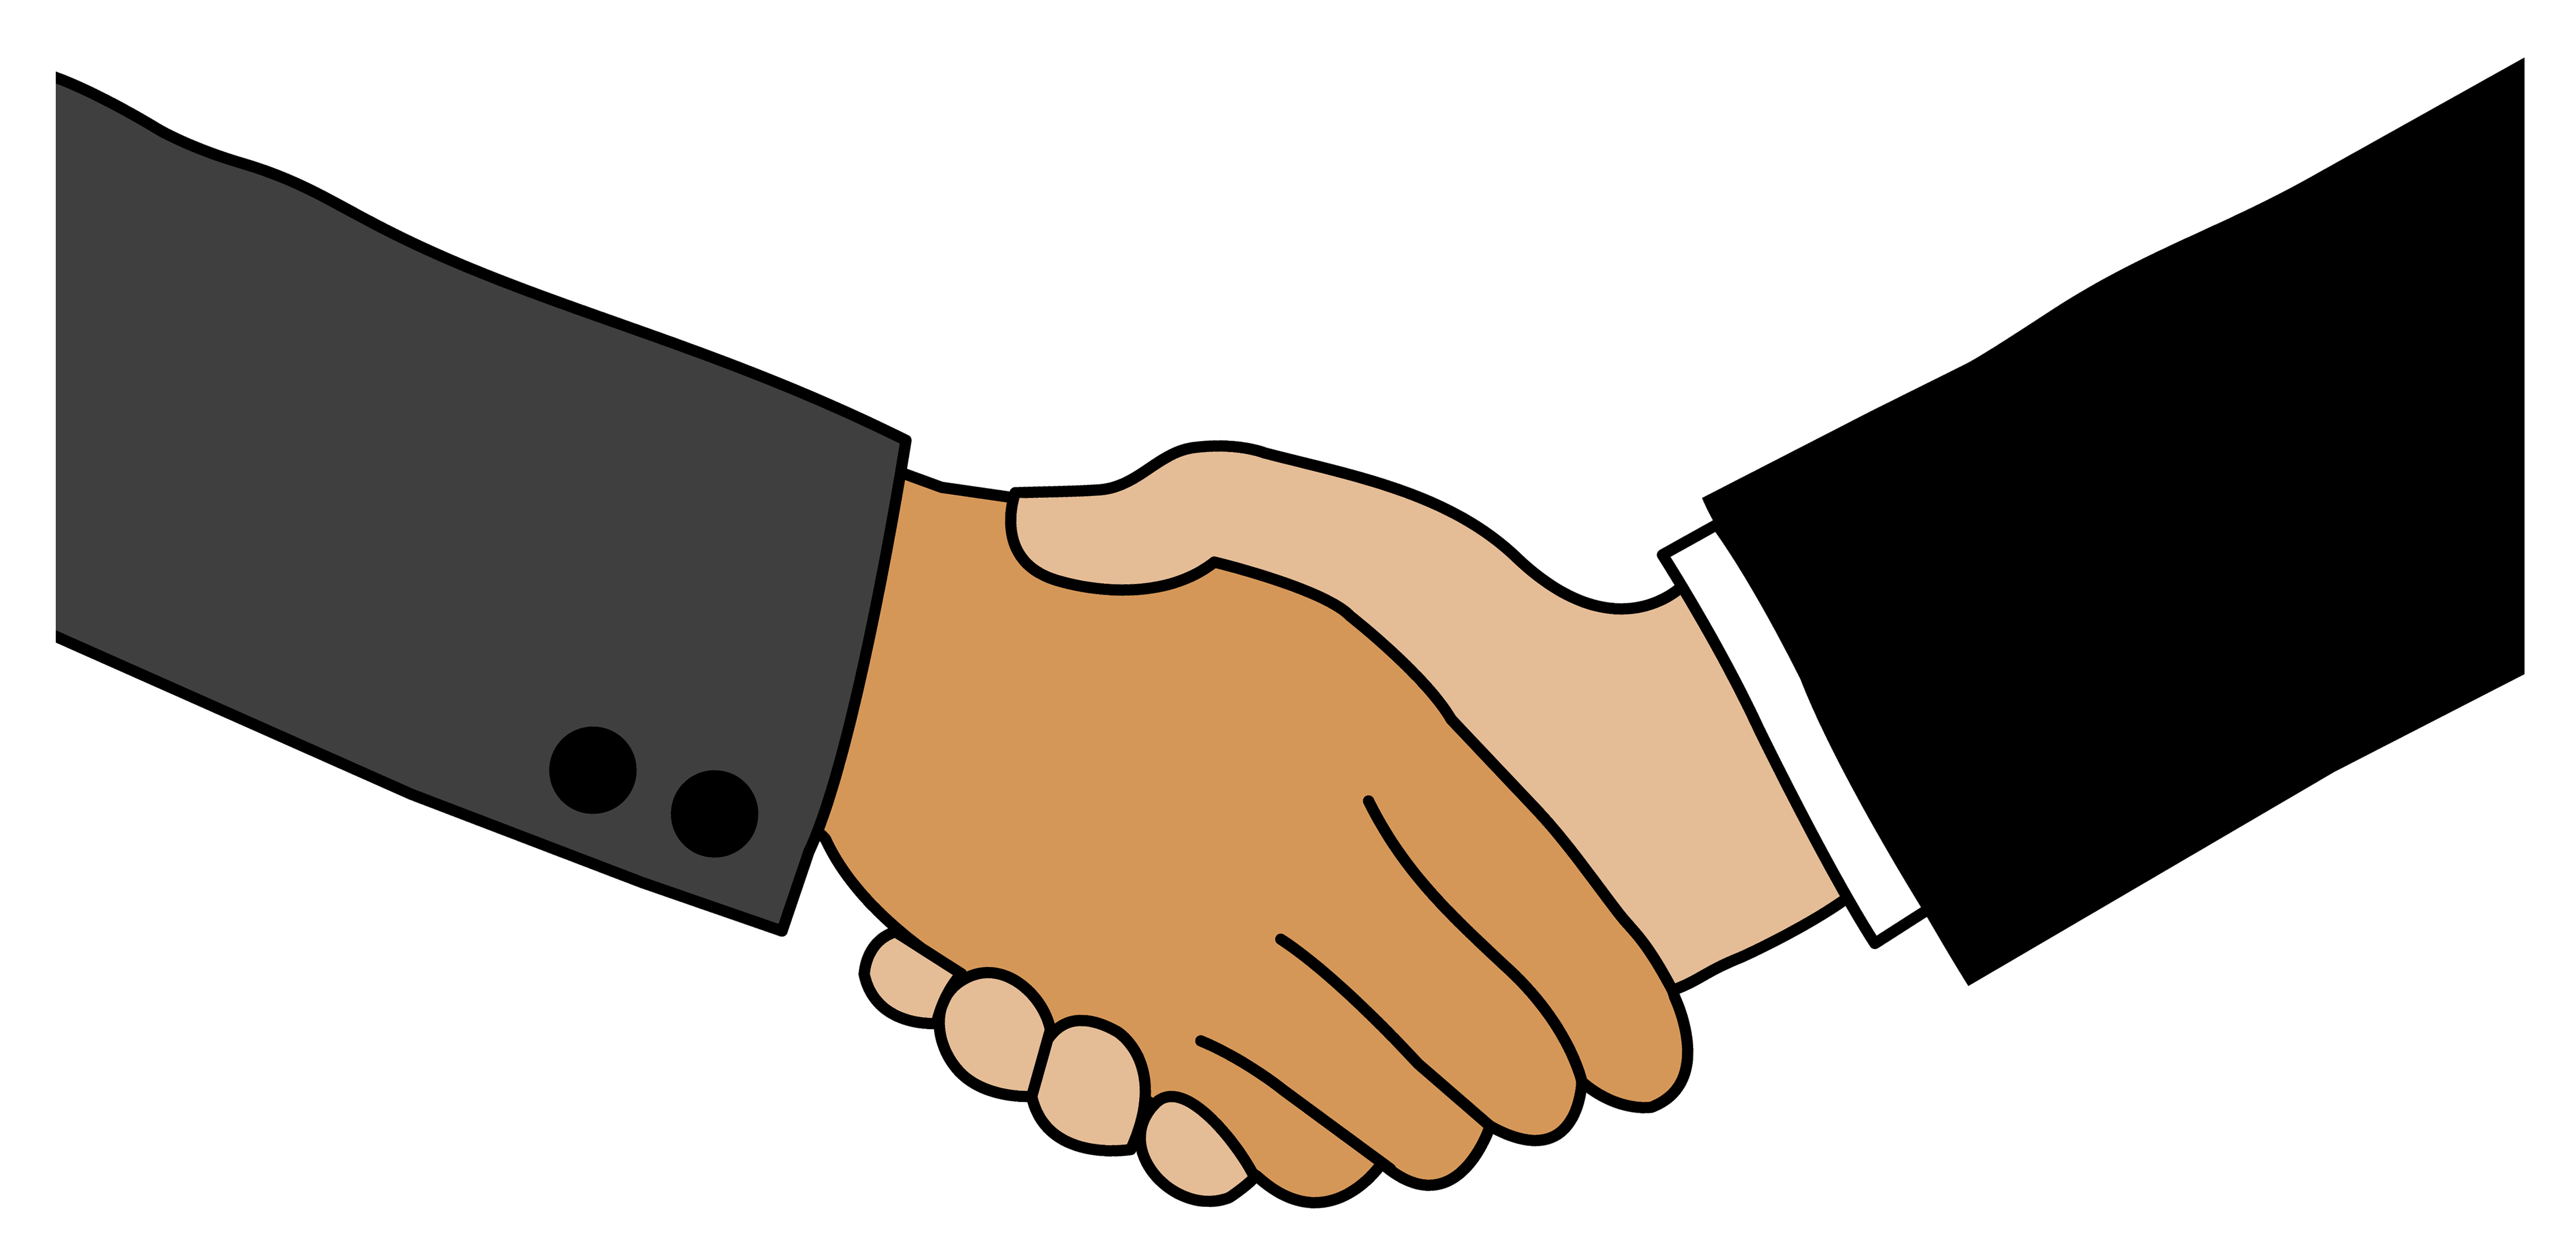 Free Business Handshake Cliparts, Download Free Clip Art